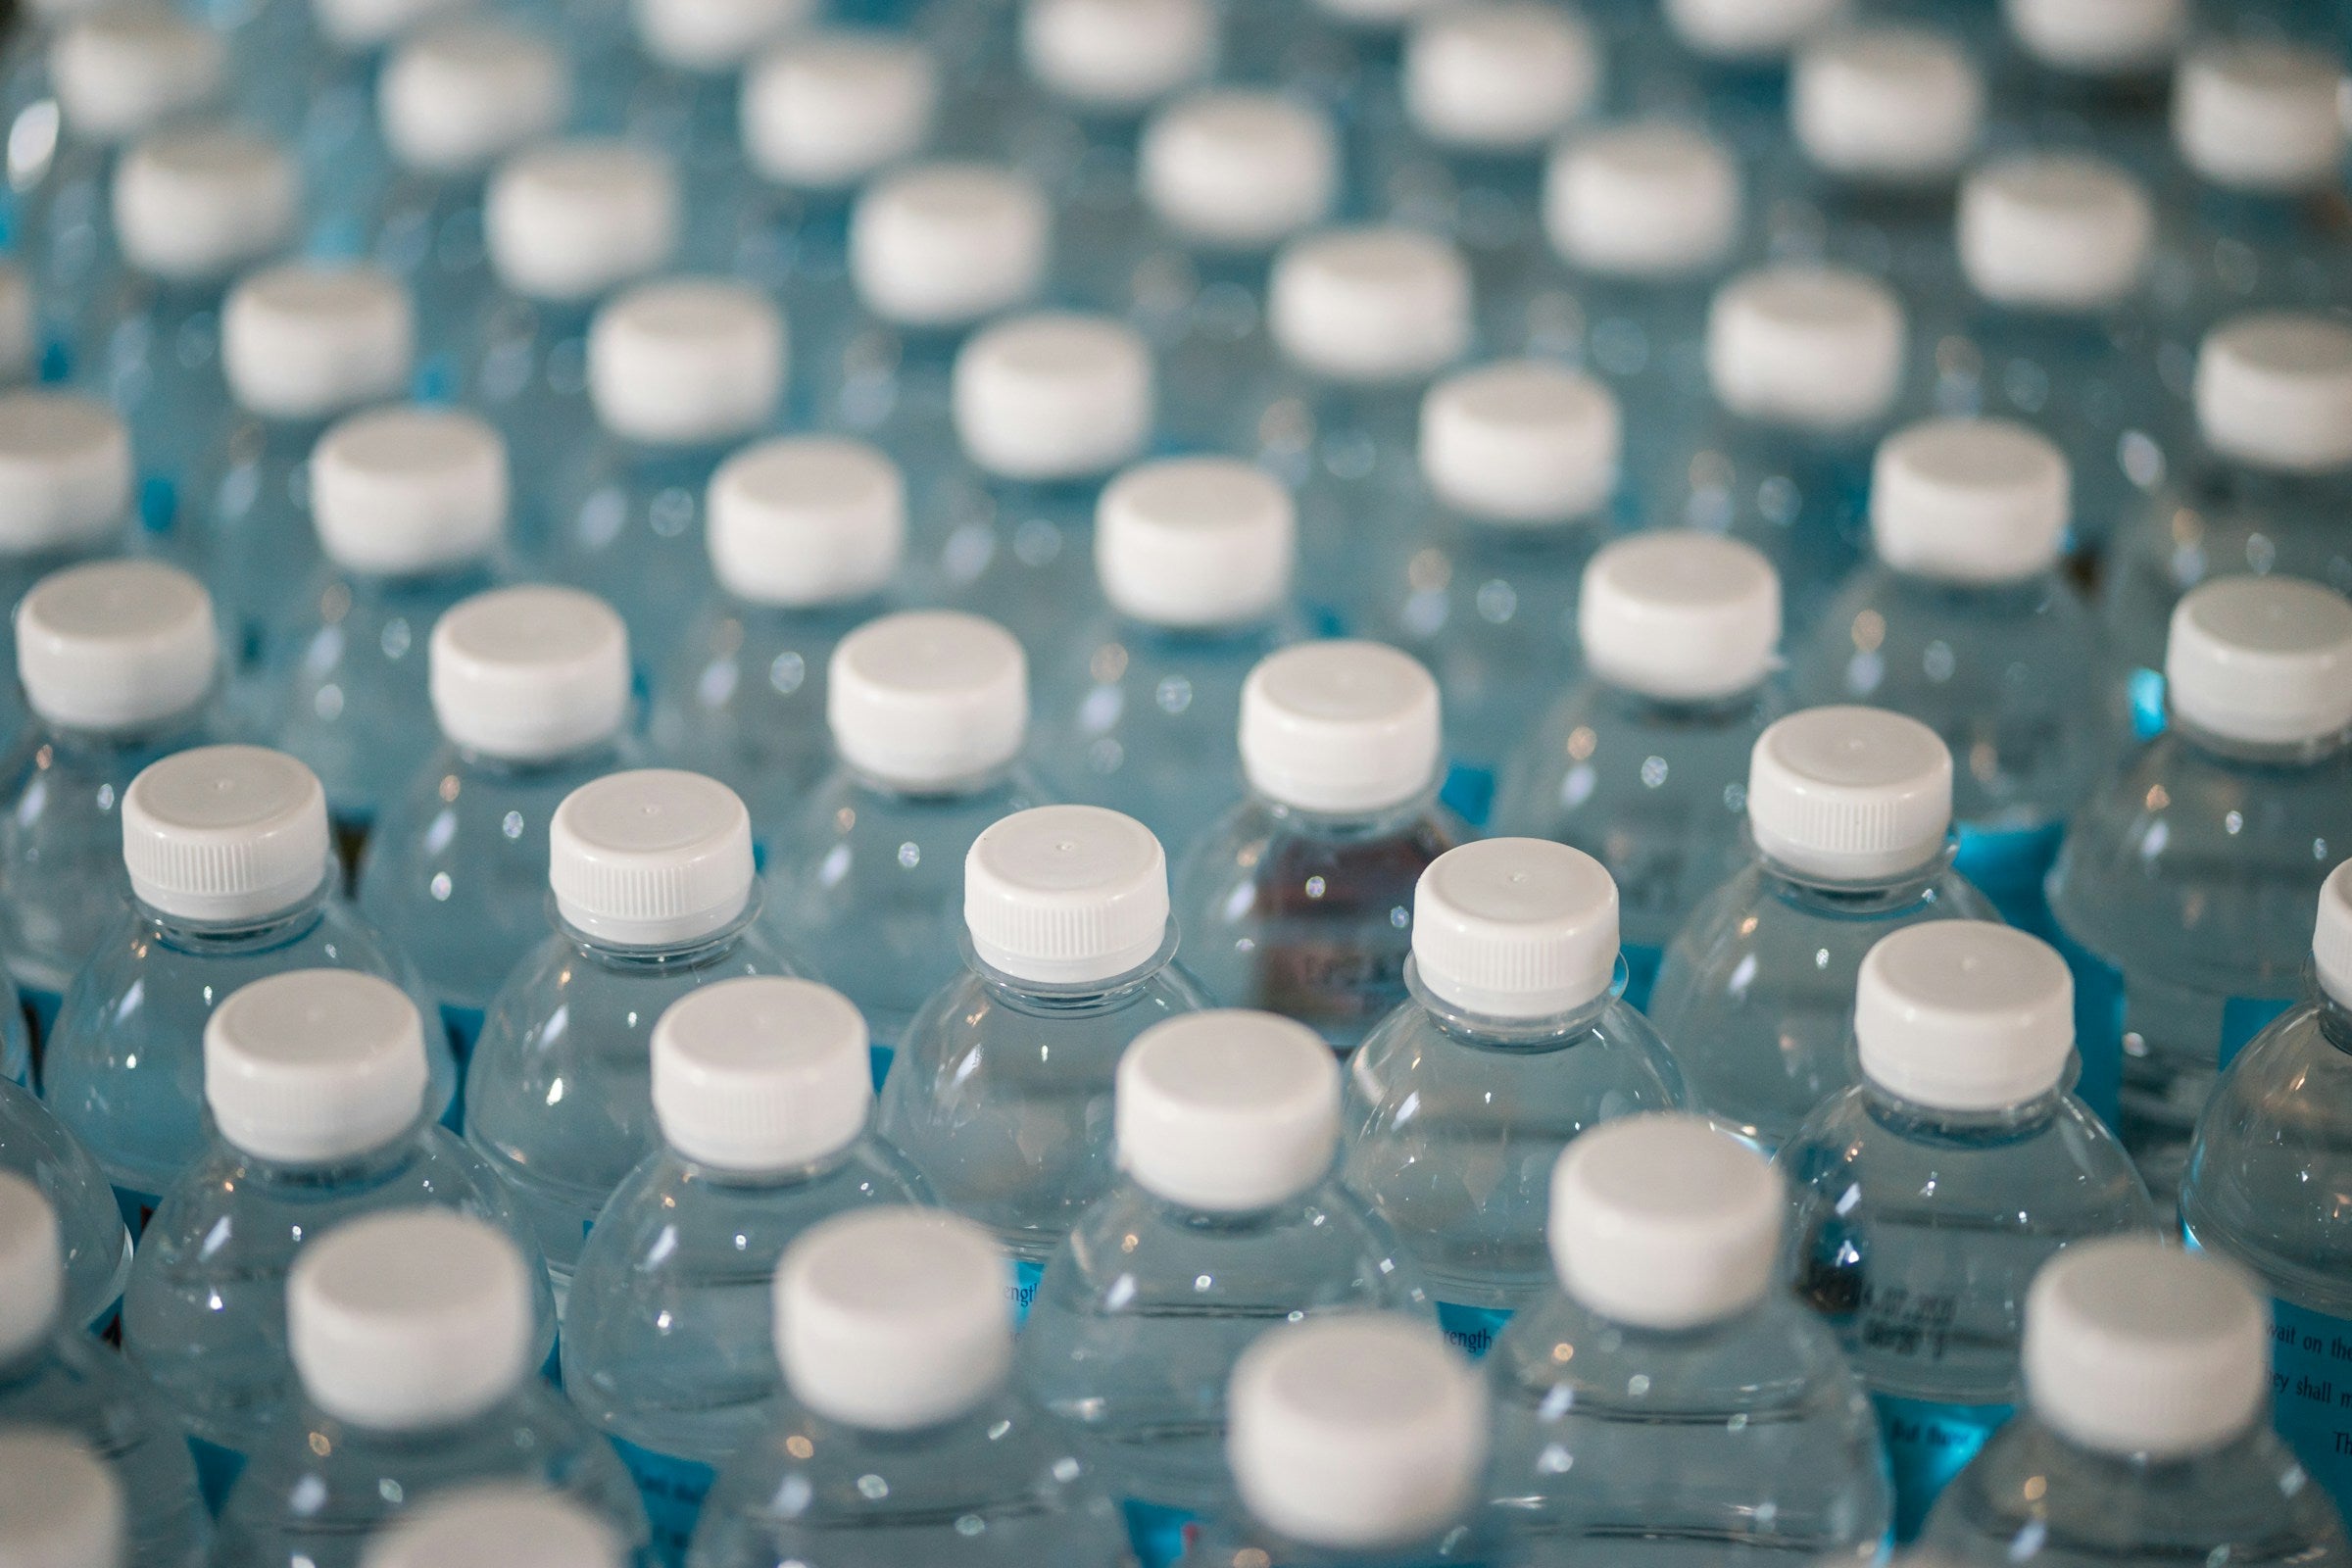 microplastics are more common in bottled water